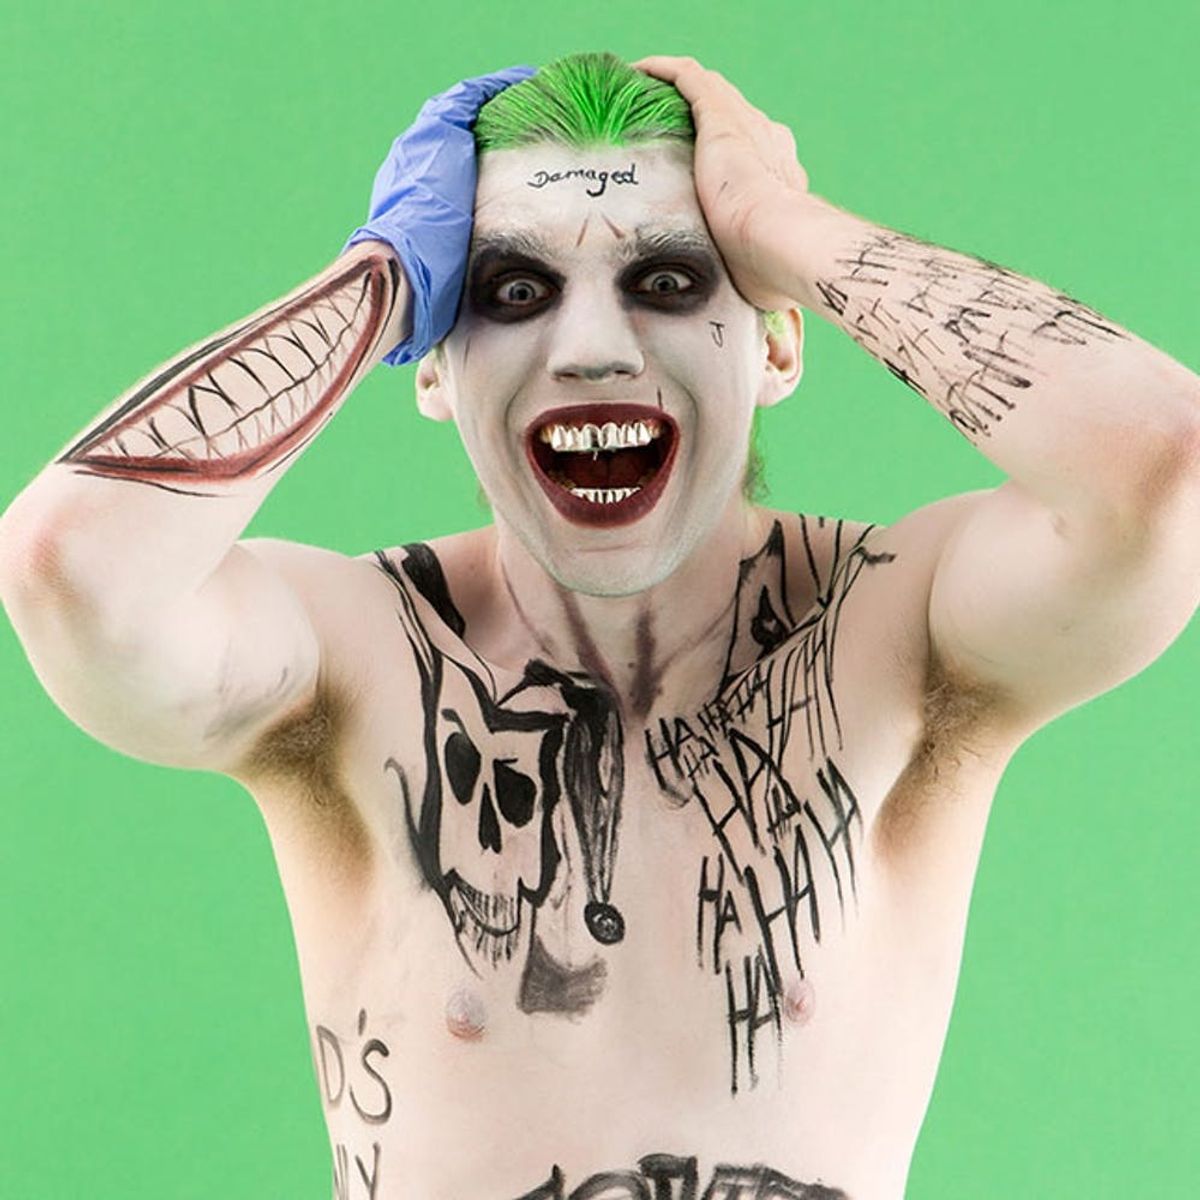 How to Make Suicide Squad’s The Joker Costume for Halloween - Brit + Co